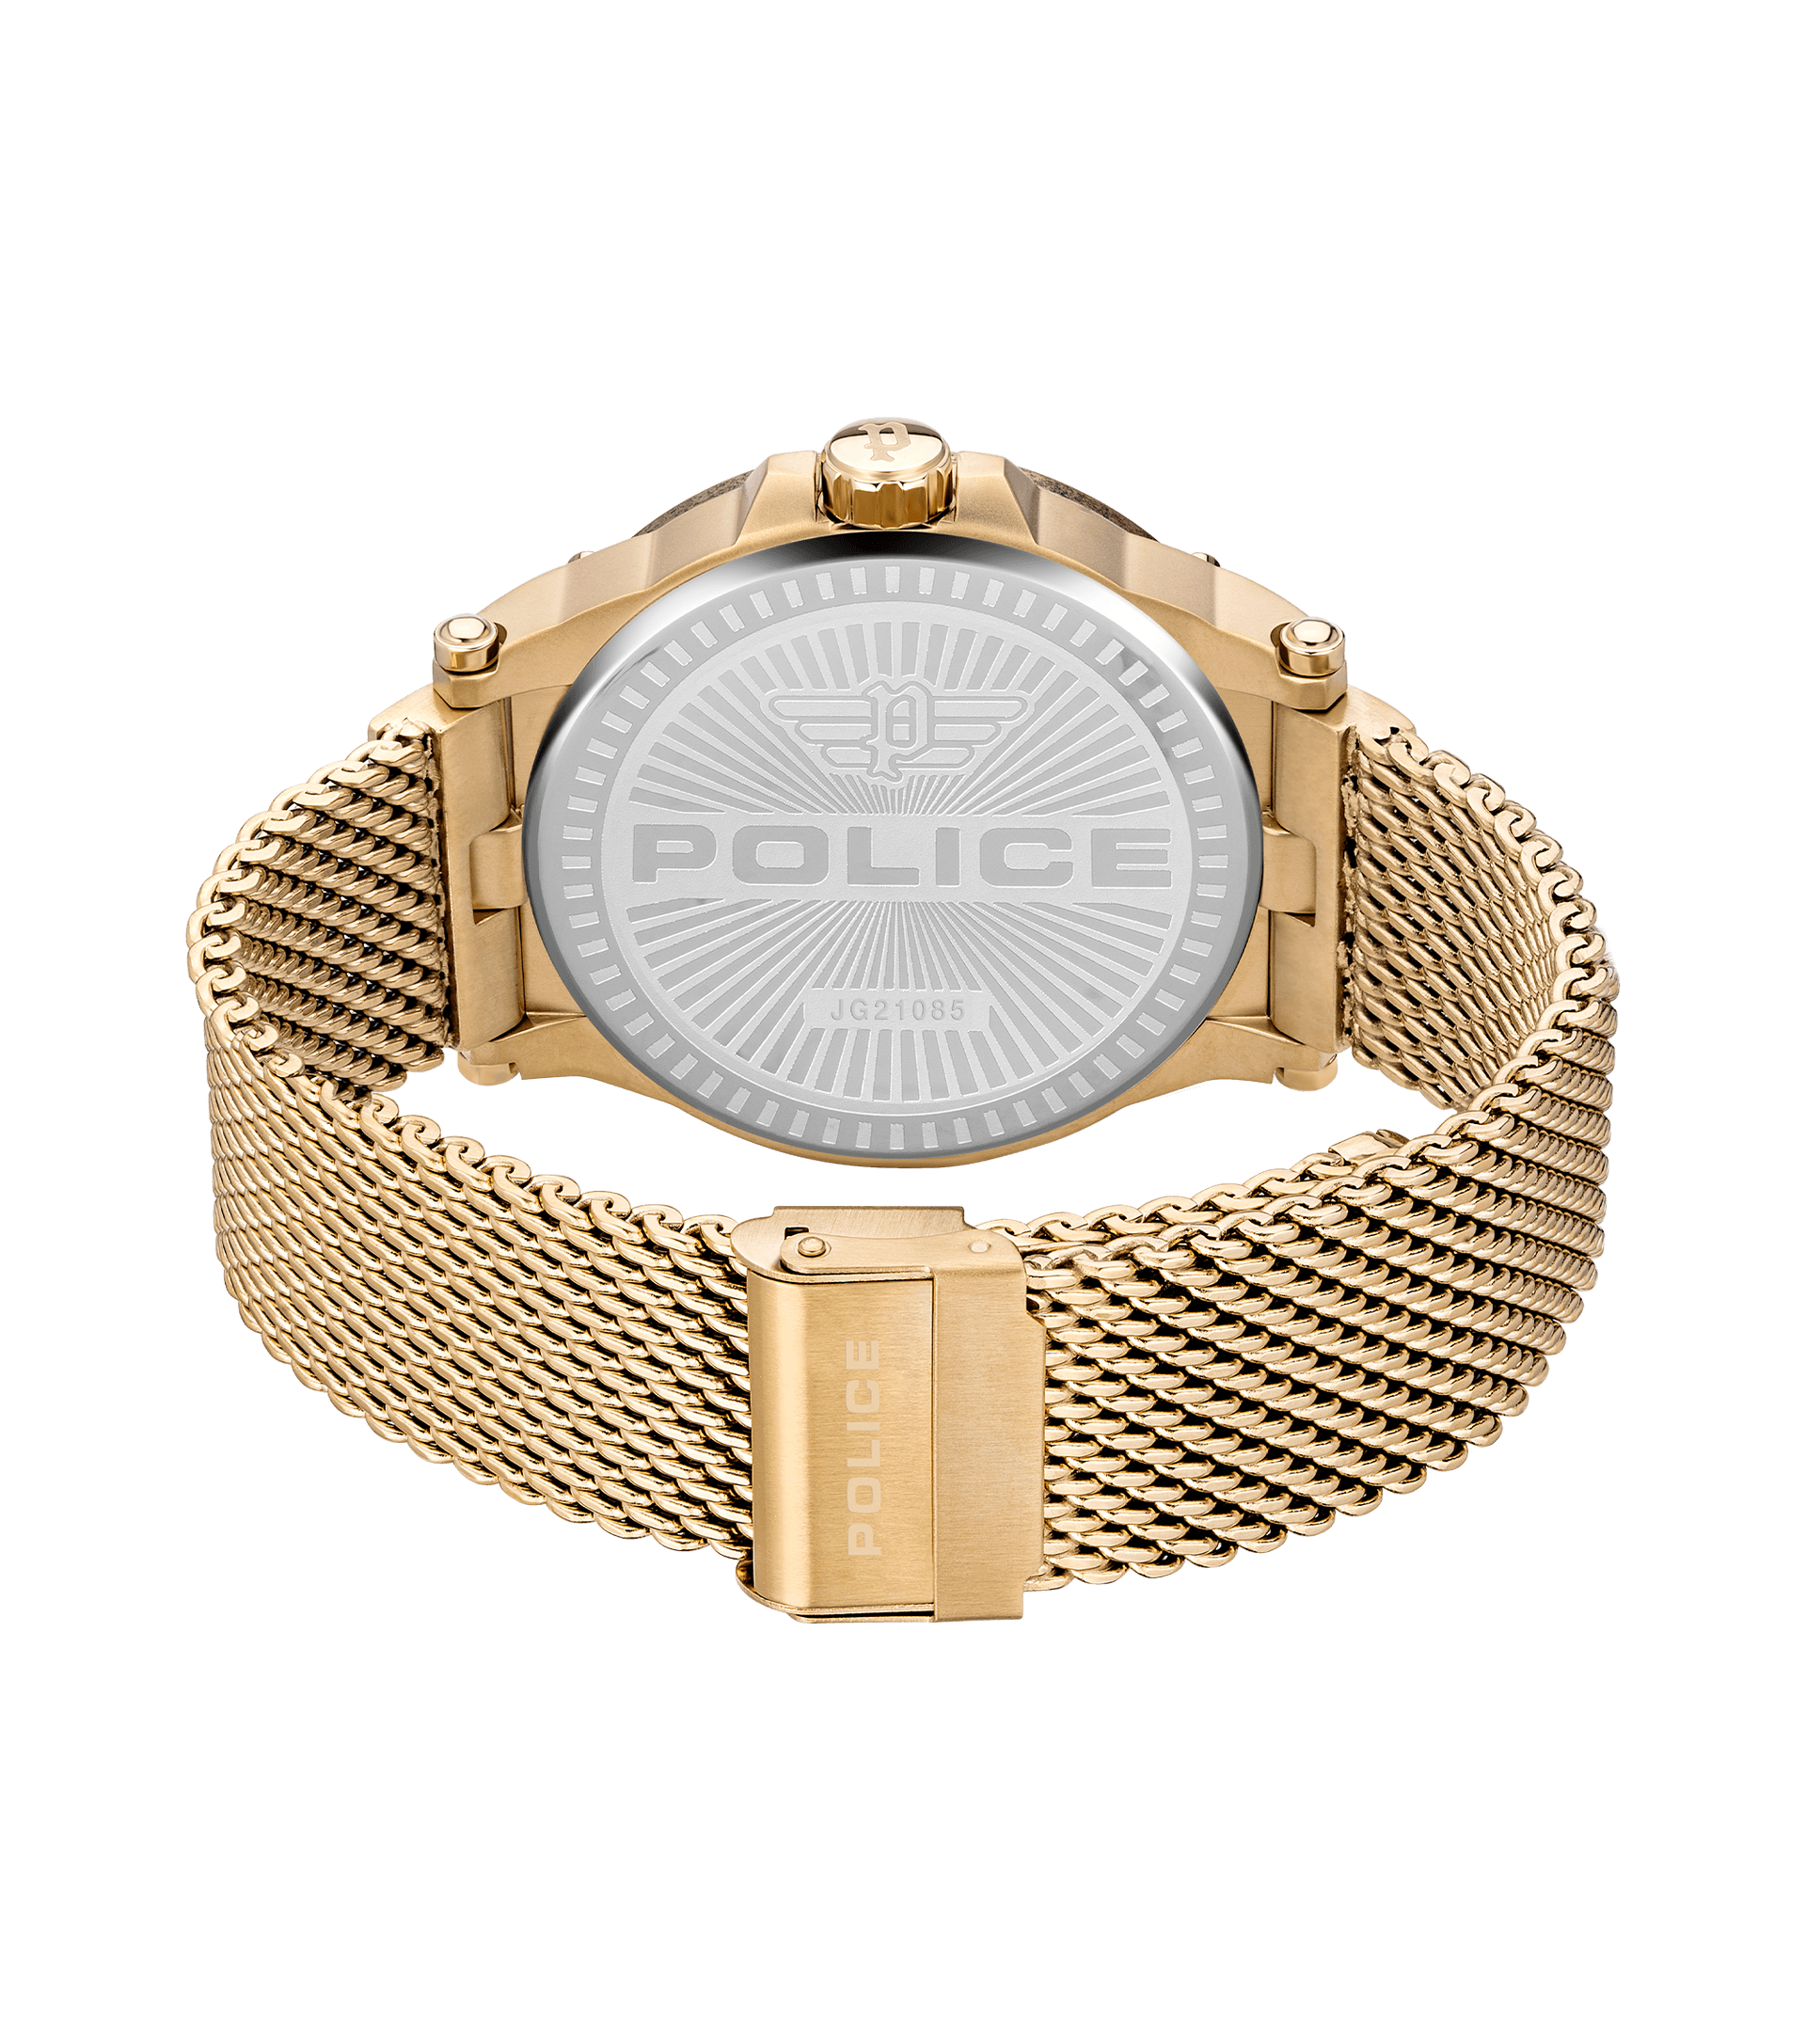 By Police Gold Vertex watches Gold, For - Watch Men Police